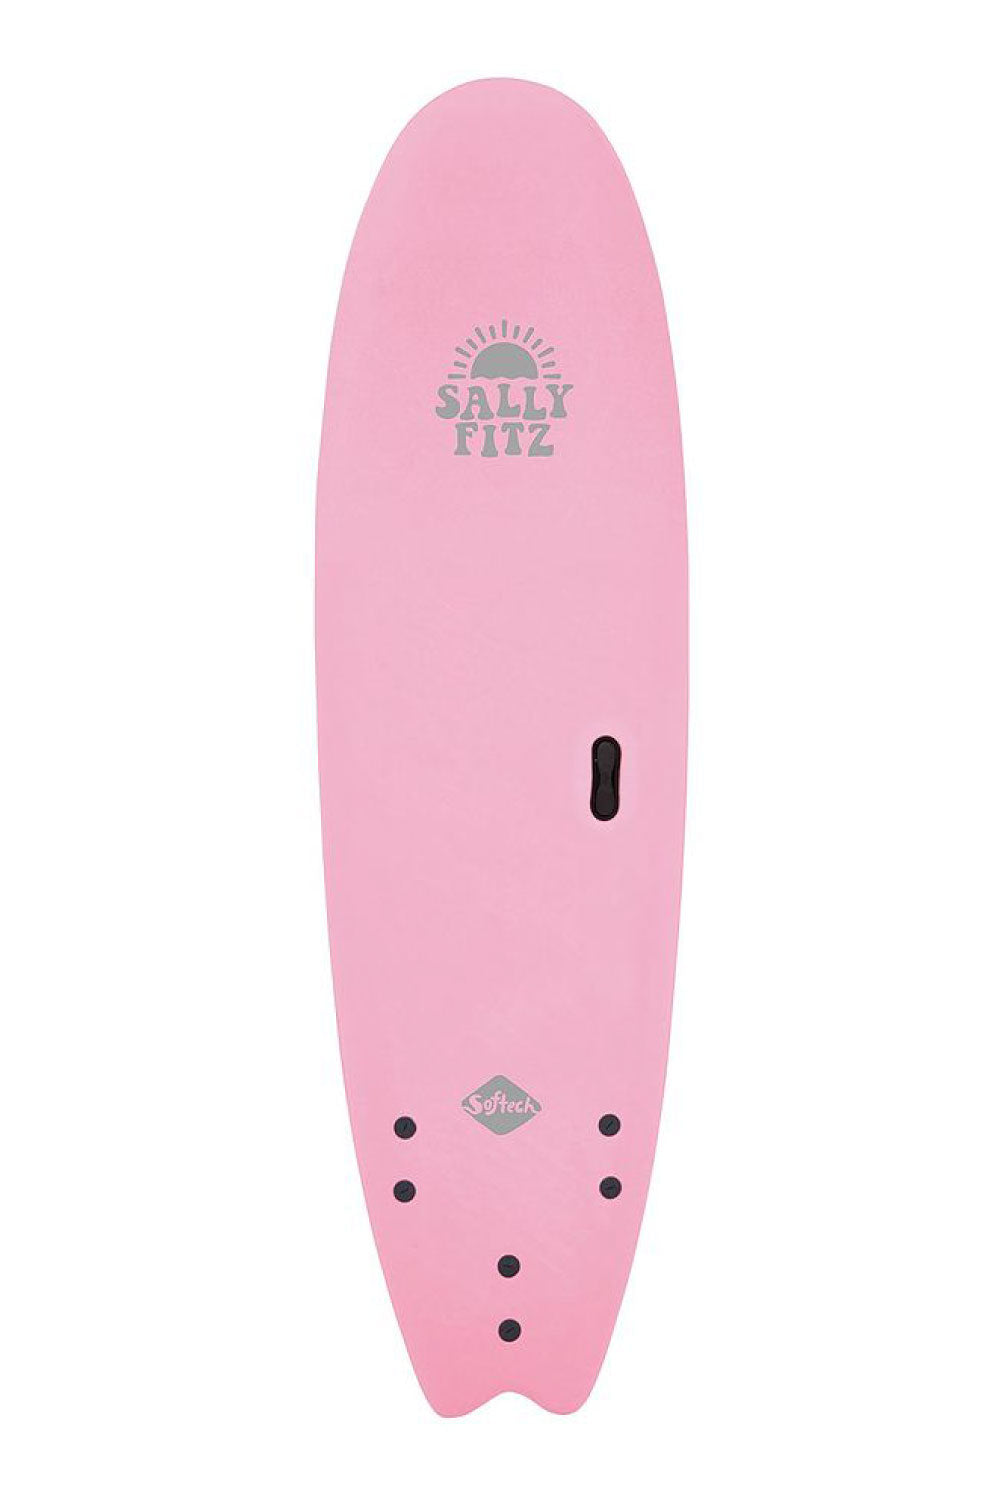 Softech Sally Fitzgibbons Signature Softboard - Comes with fins